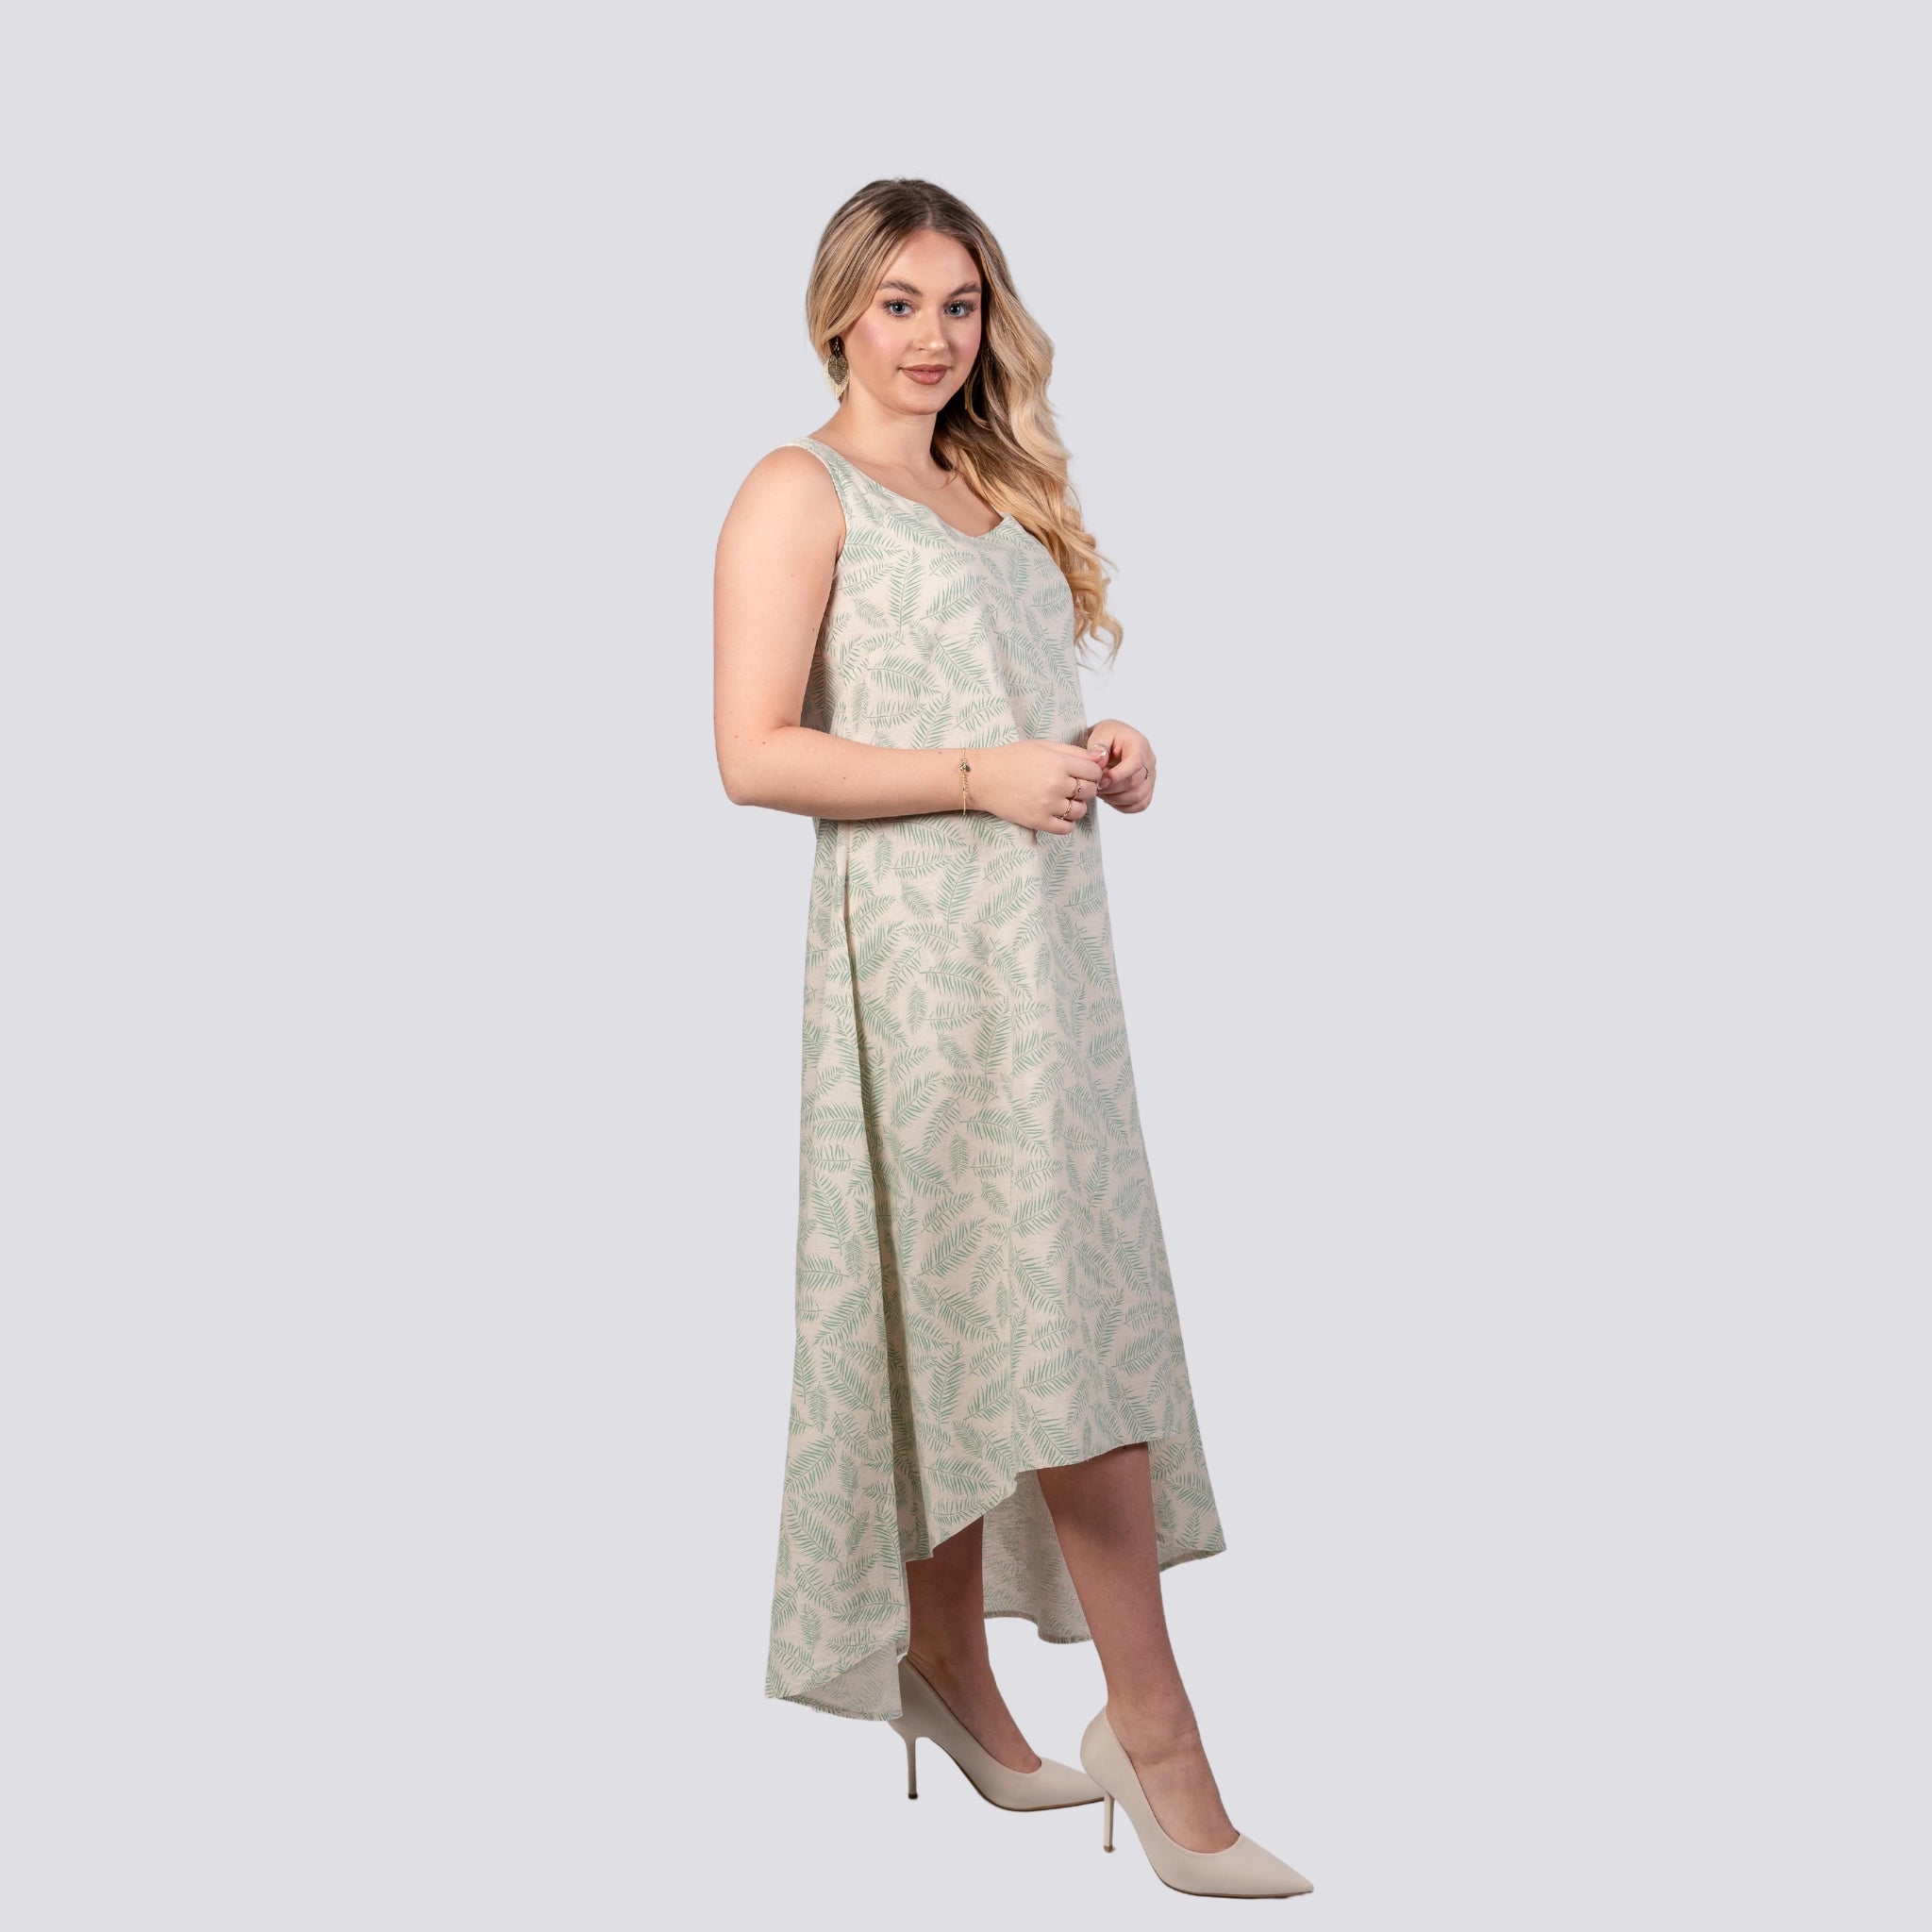 Woman in a sleeveless U-neck Karee Mystic Breeze High Low Linen Cotton Midi Dress and white heels standing against a grey background, looking towards the camera with a slight smile.